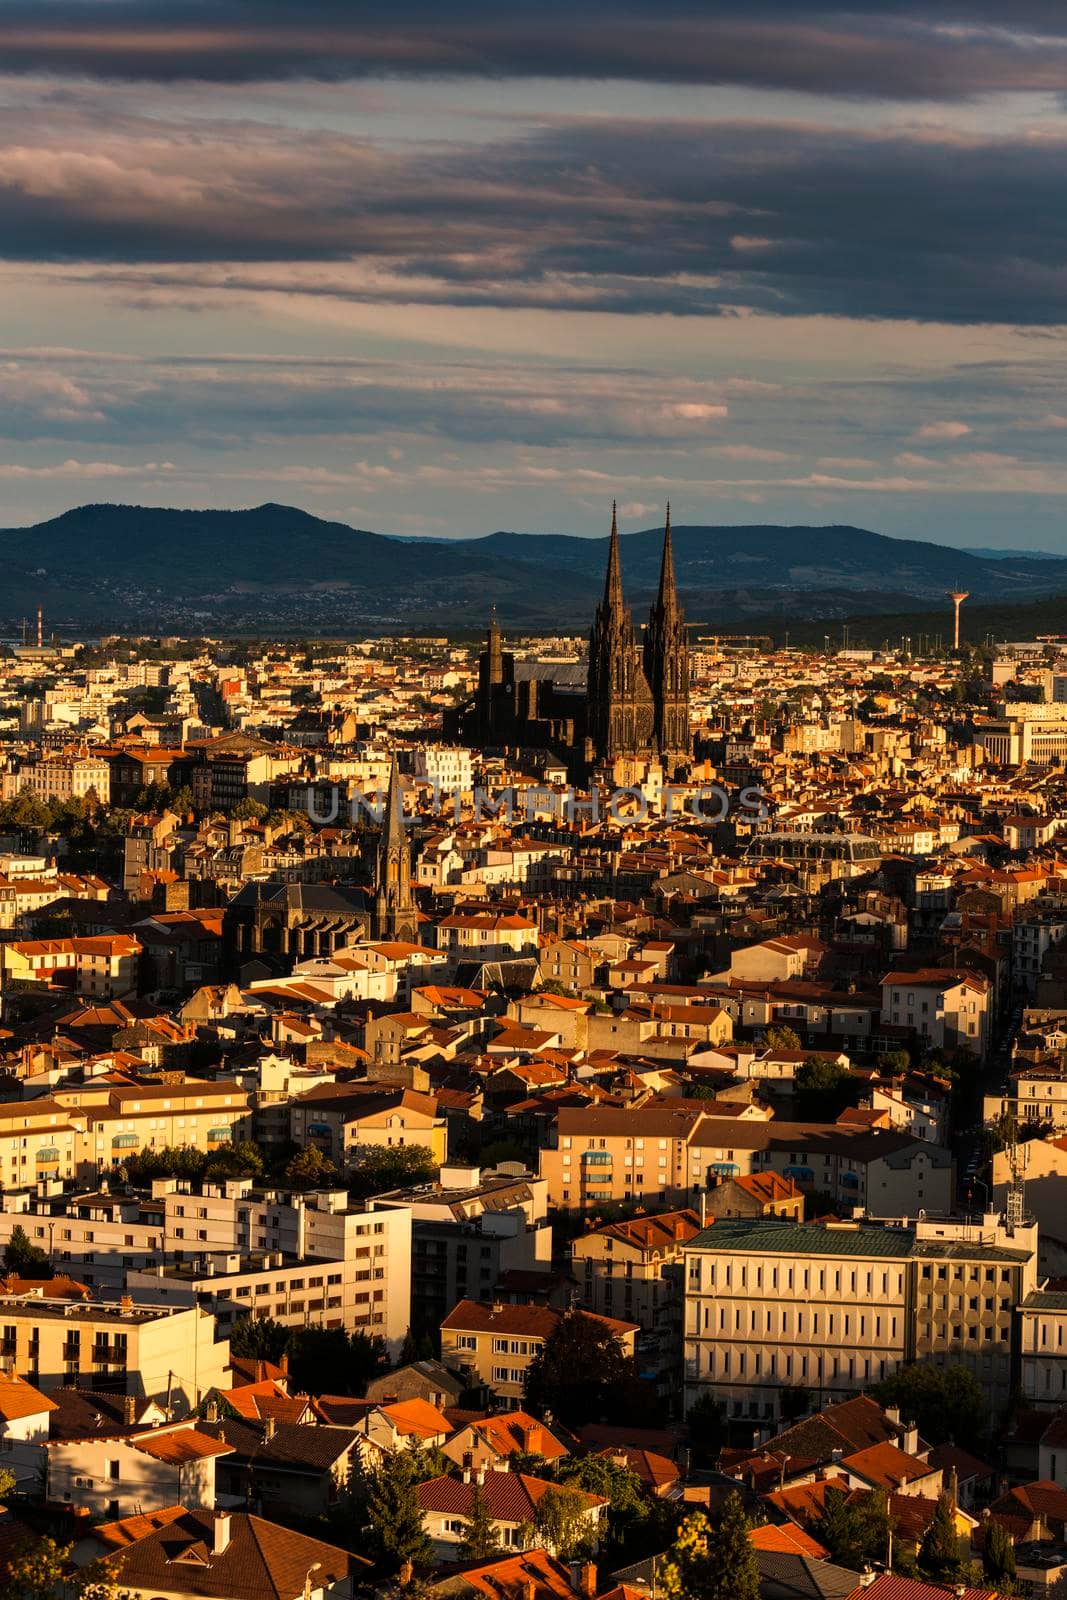 Architecture of Clermont-Ferrand by benkrut